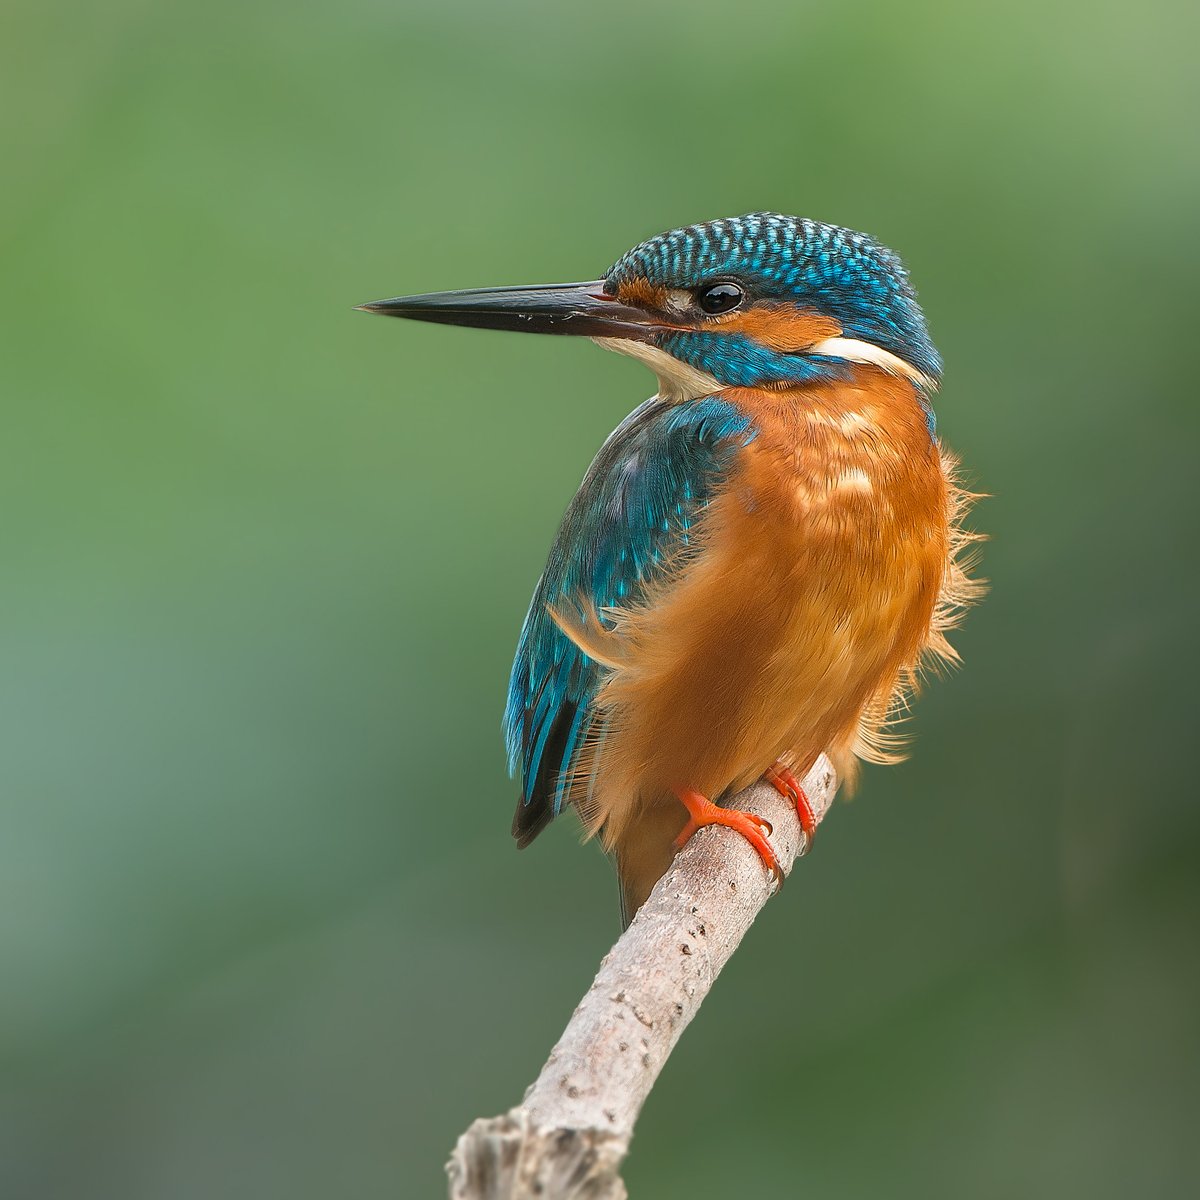 It's #LostWordsWednesday! The mystery species from last week's clues was of course the kingfisher! Congratulations to the winner of the signed copy of 'The Lost Words': Claire Hamilton. Did you know one place in Pembrokeshire you can find this often elusive bird is Carew Castle?